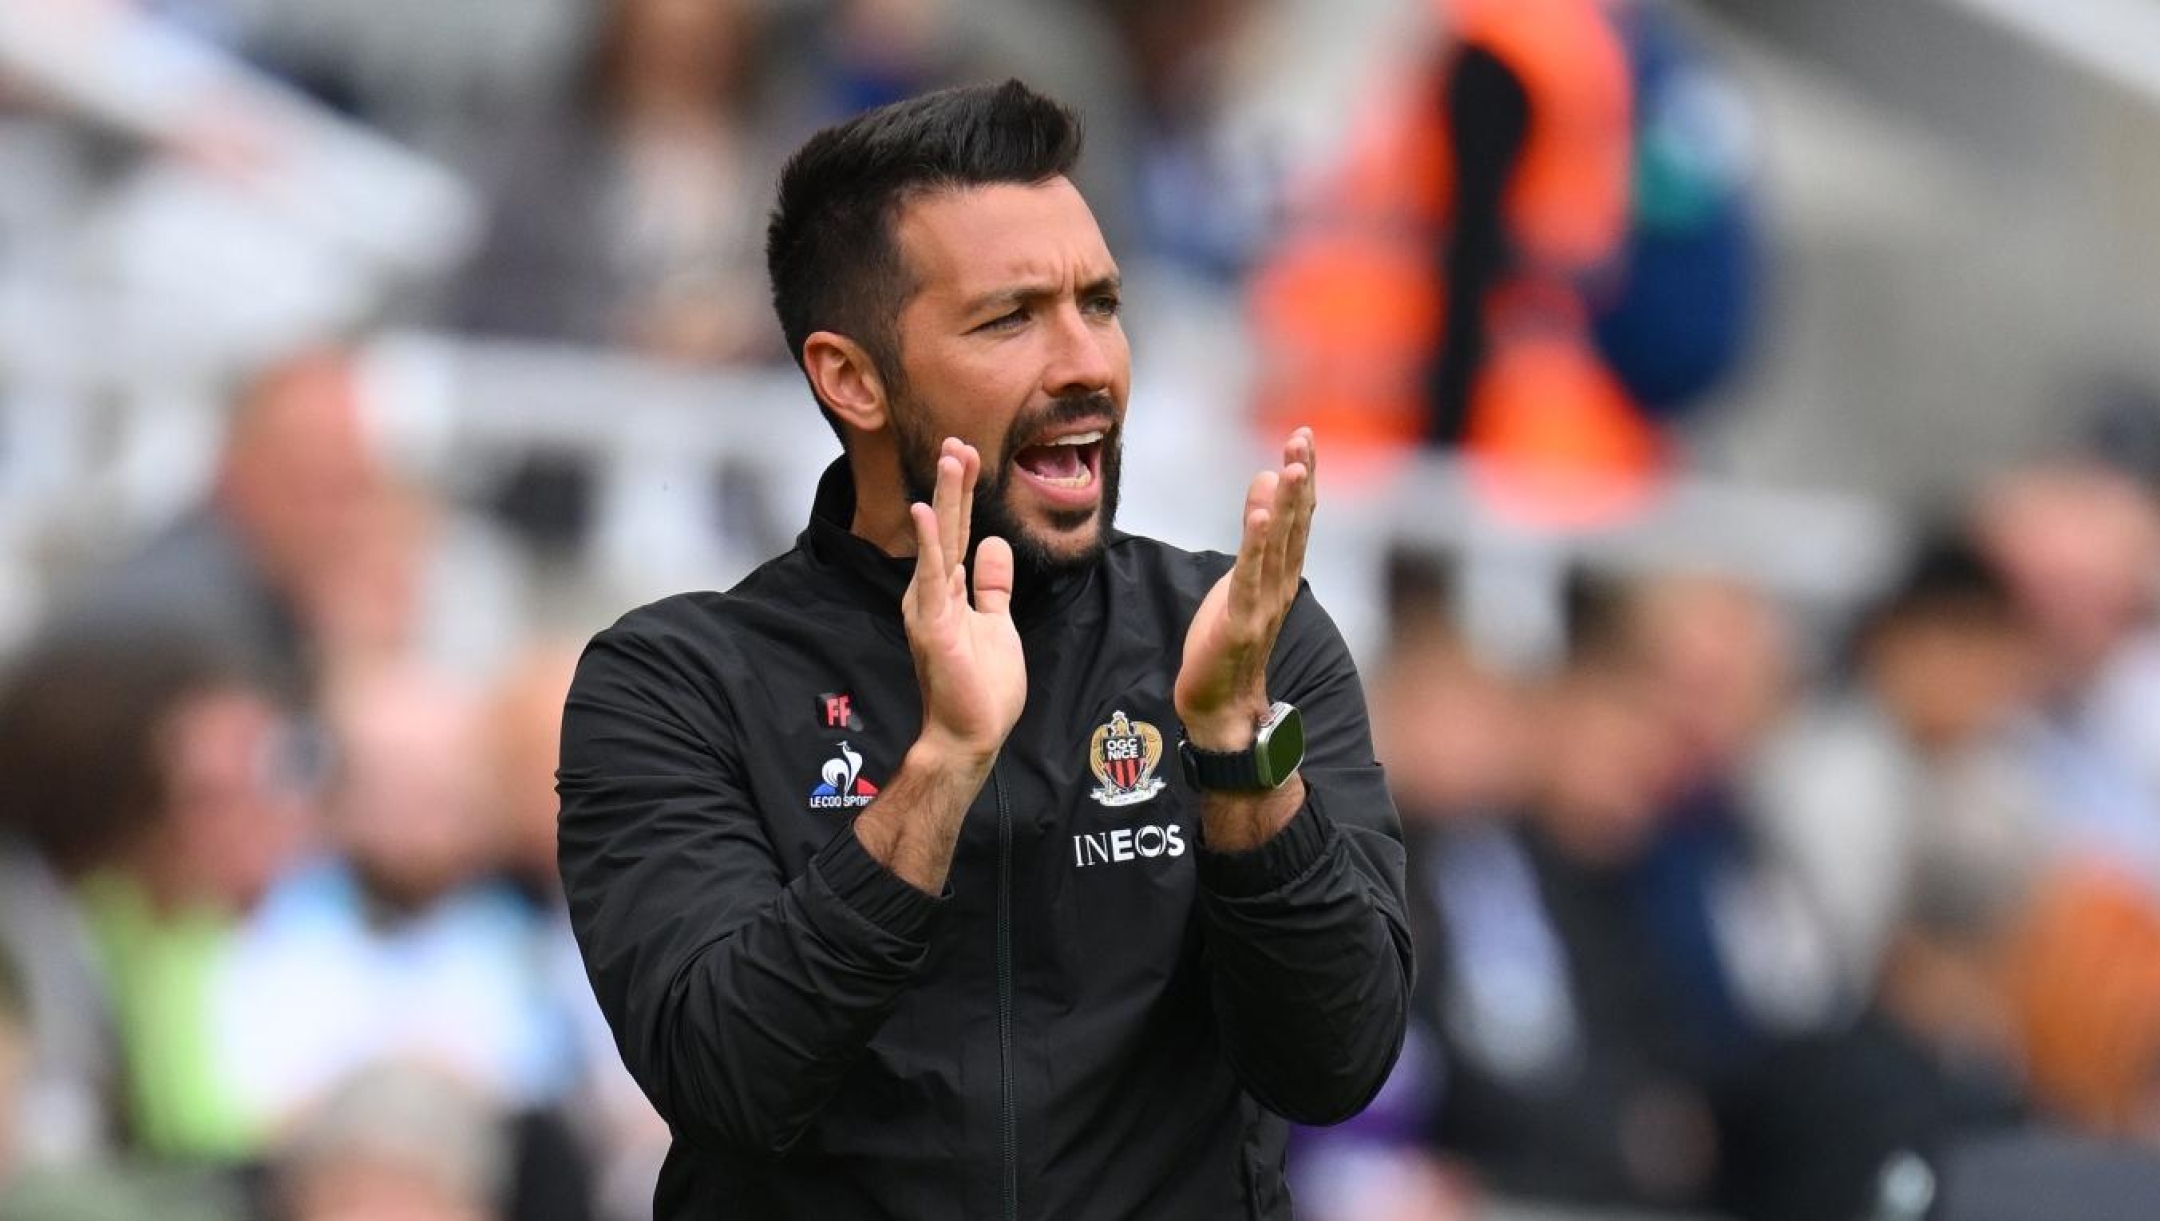 NEWCASTLE UPON TYNE, ENGLAND - AUGUST 06: Nice manager Francesco Farioli reacts during the pre-season friendly match between ACF Fiorentina and OGC Nice at St James' Park on August 06, 2023 in Newcastle upon Tyne, England. (Photo by Stu Forster/Getty Images)